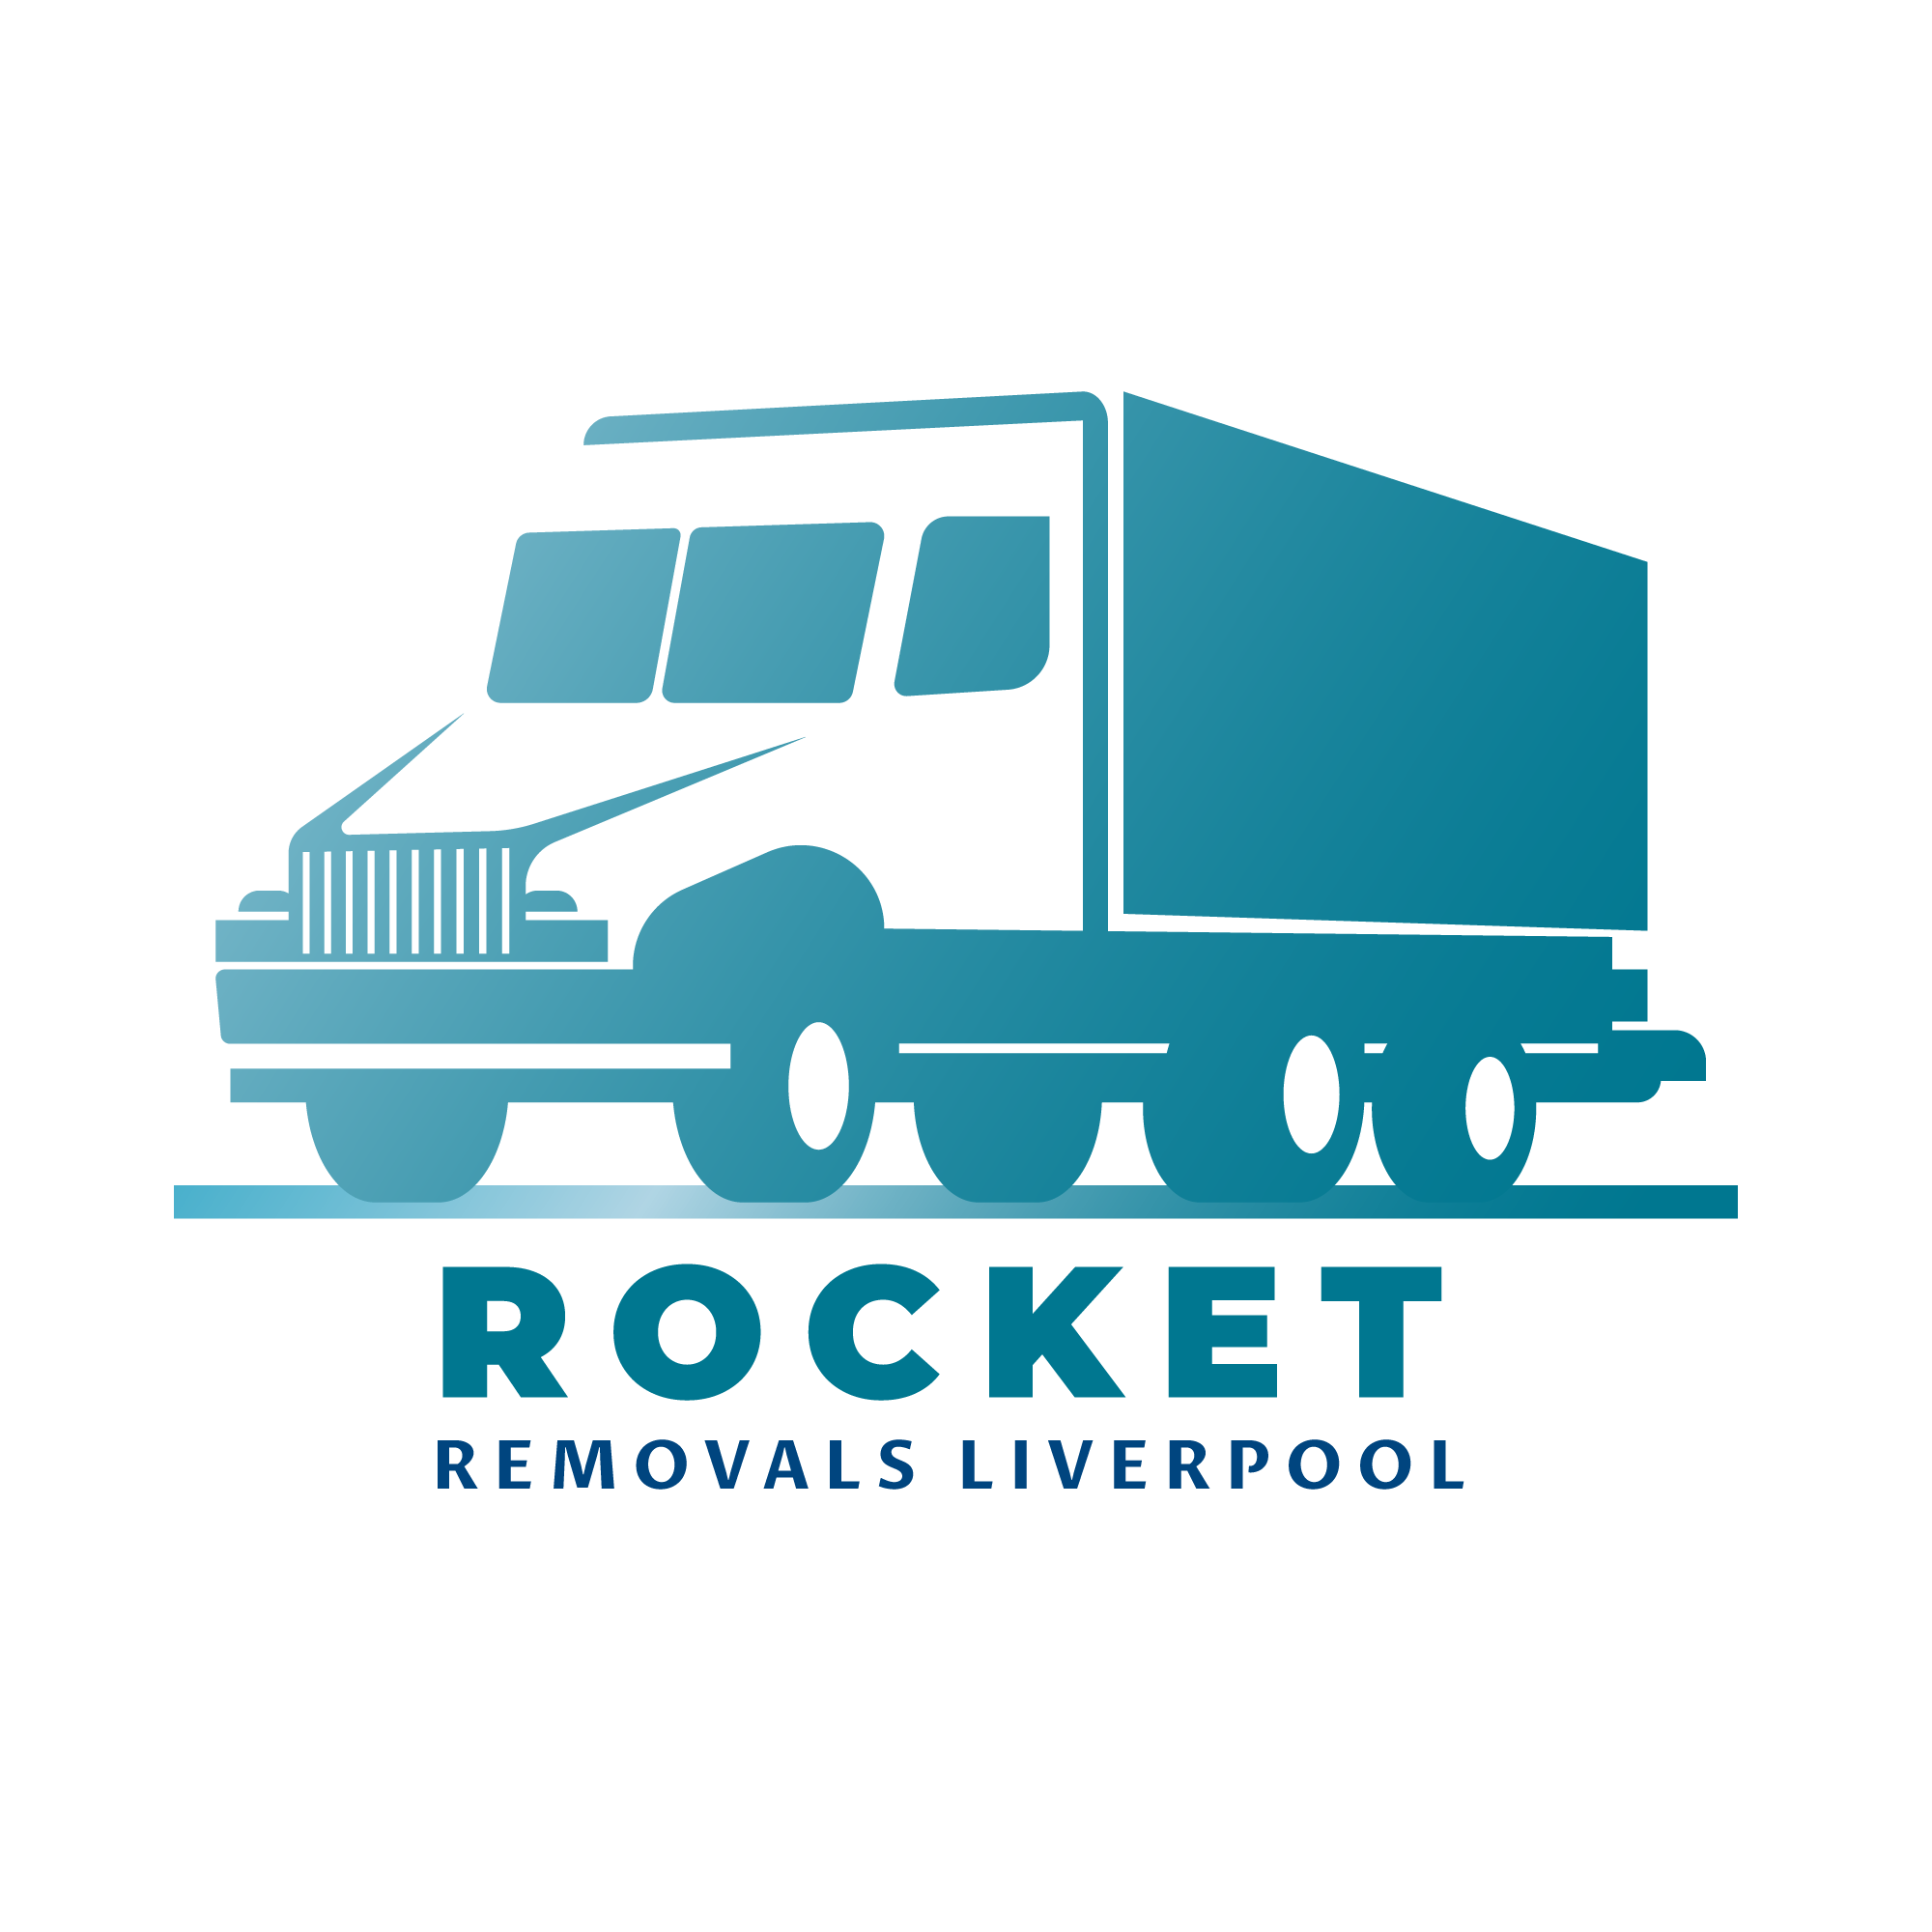 Rocket Removals Liverpool Elaborated on The Top Qualities of Excellent Moving Companies